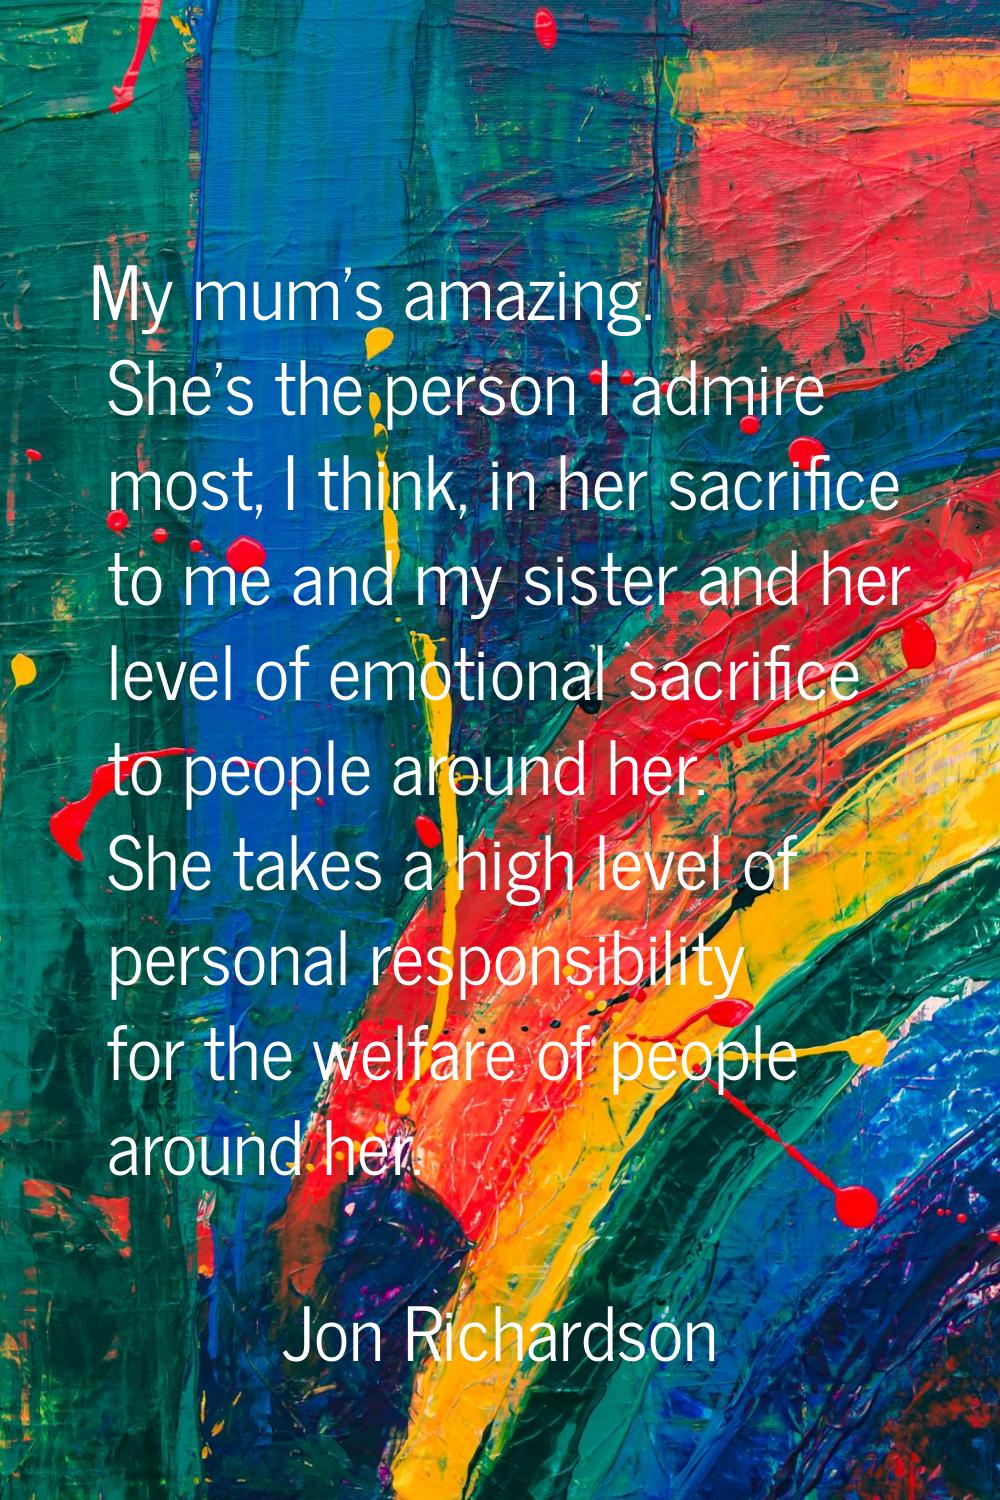 My mum's amazing. She's the person I admire most, I think, in her sacrifice to me and my sister and